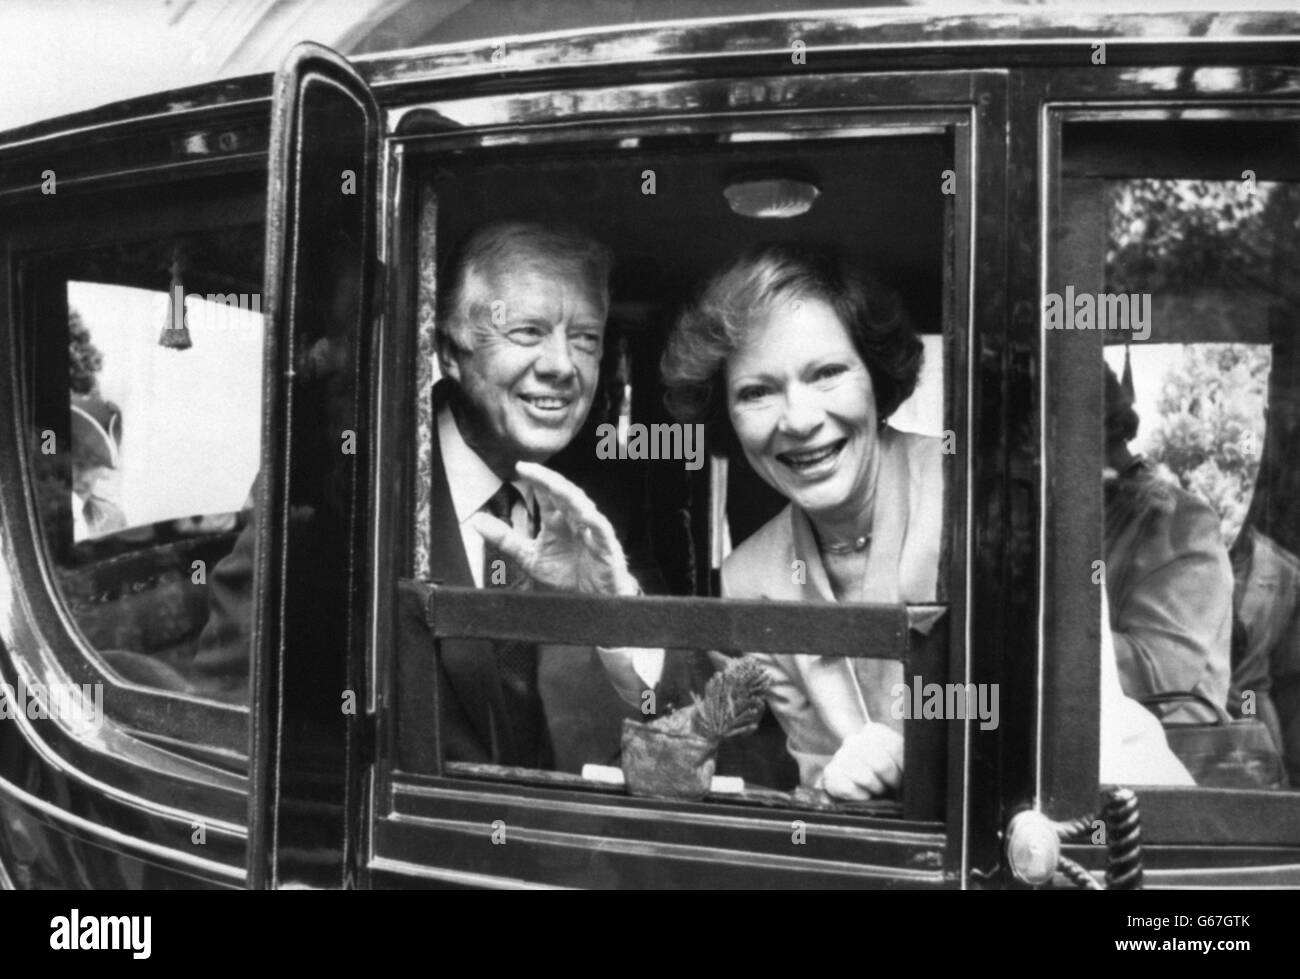 Politics - Former US President Jimmy Carter and his wife Rosalyn - Lord Mayor's parade - Newcastle Stock Photo